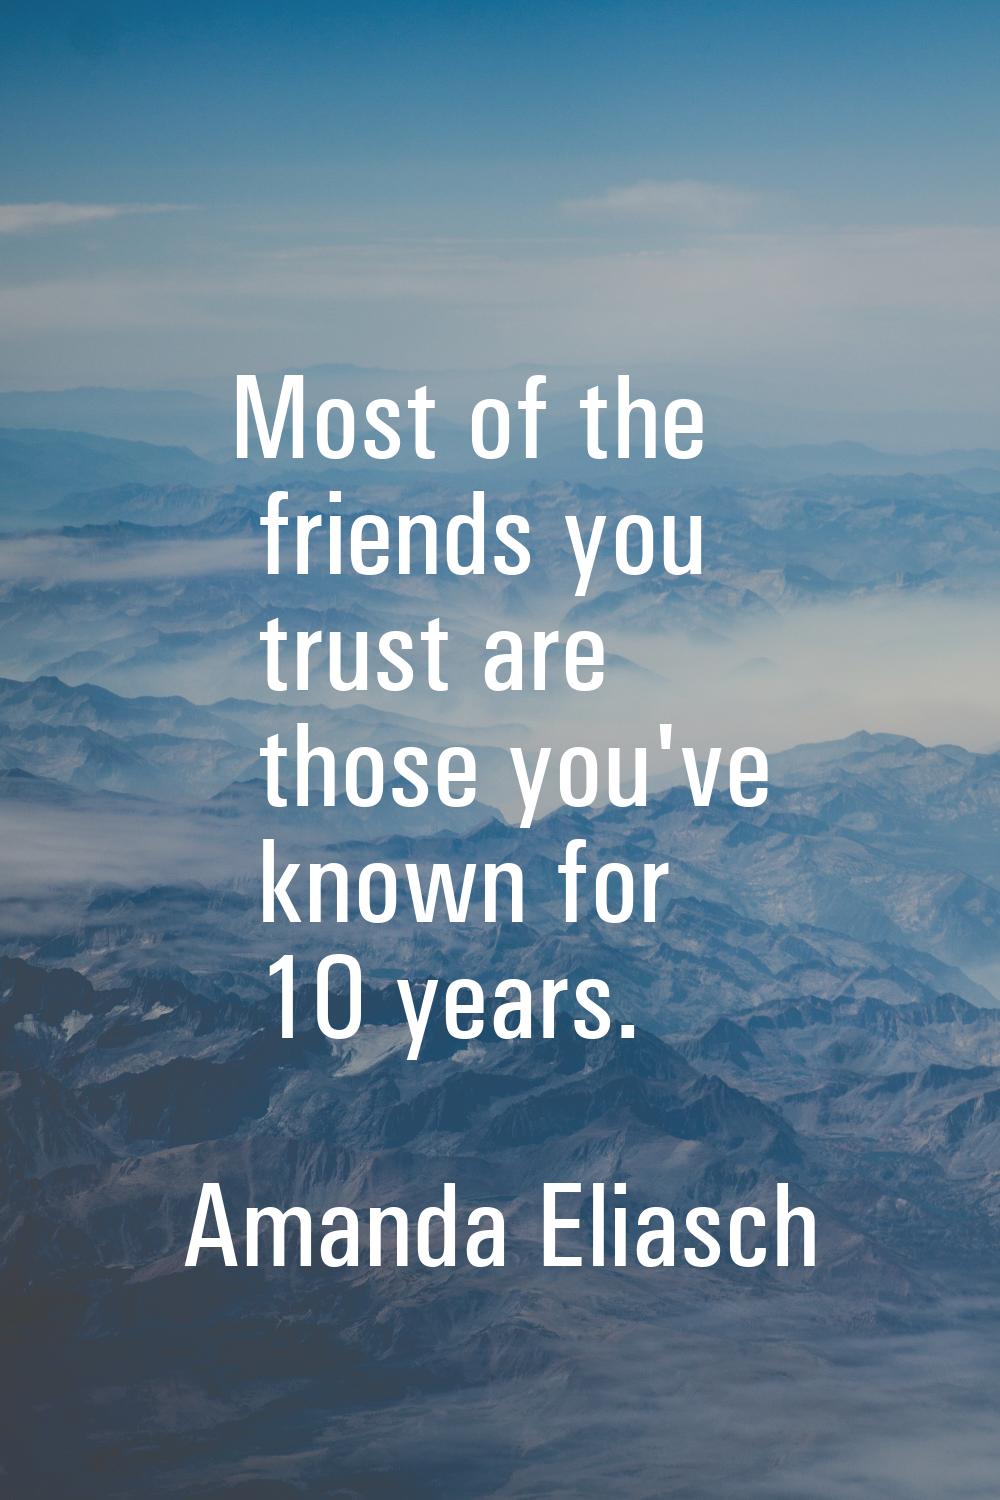 Most of the friends you trust are those you've known for 10 years.